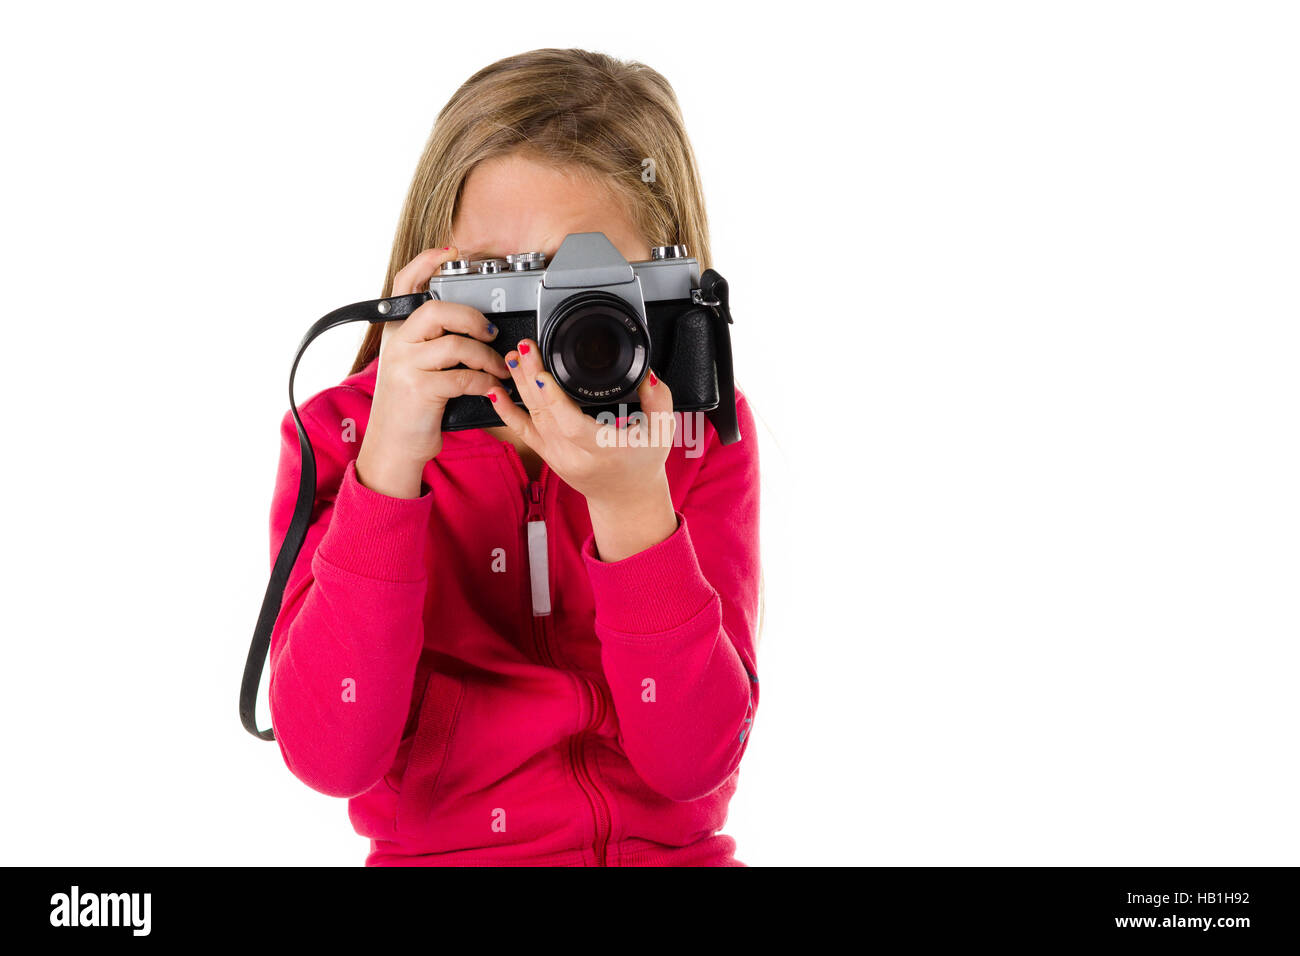 Young girl looking through the viewfinder of  a vintage SLR camera isolated on a white background Stock Photo